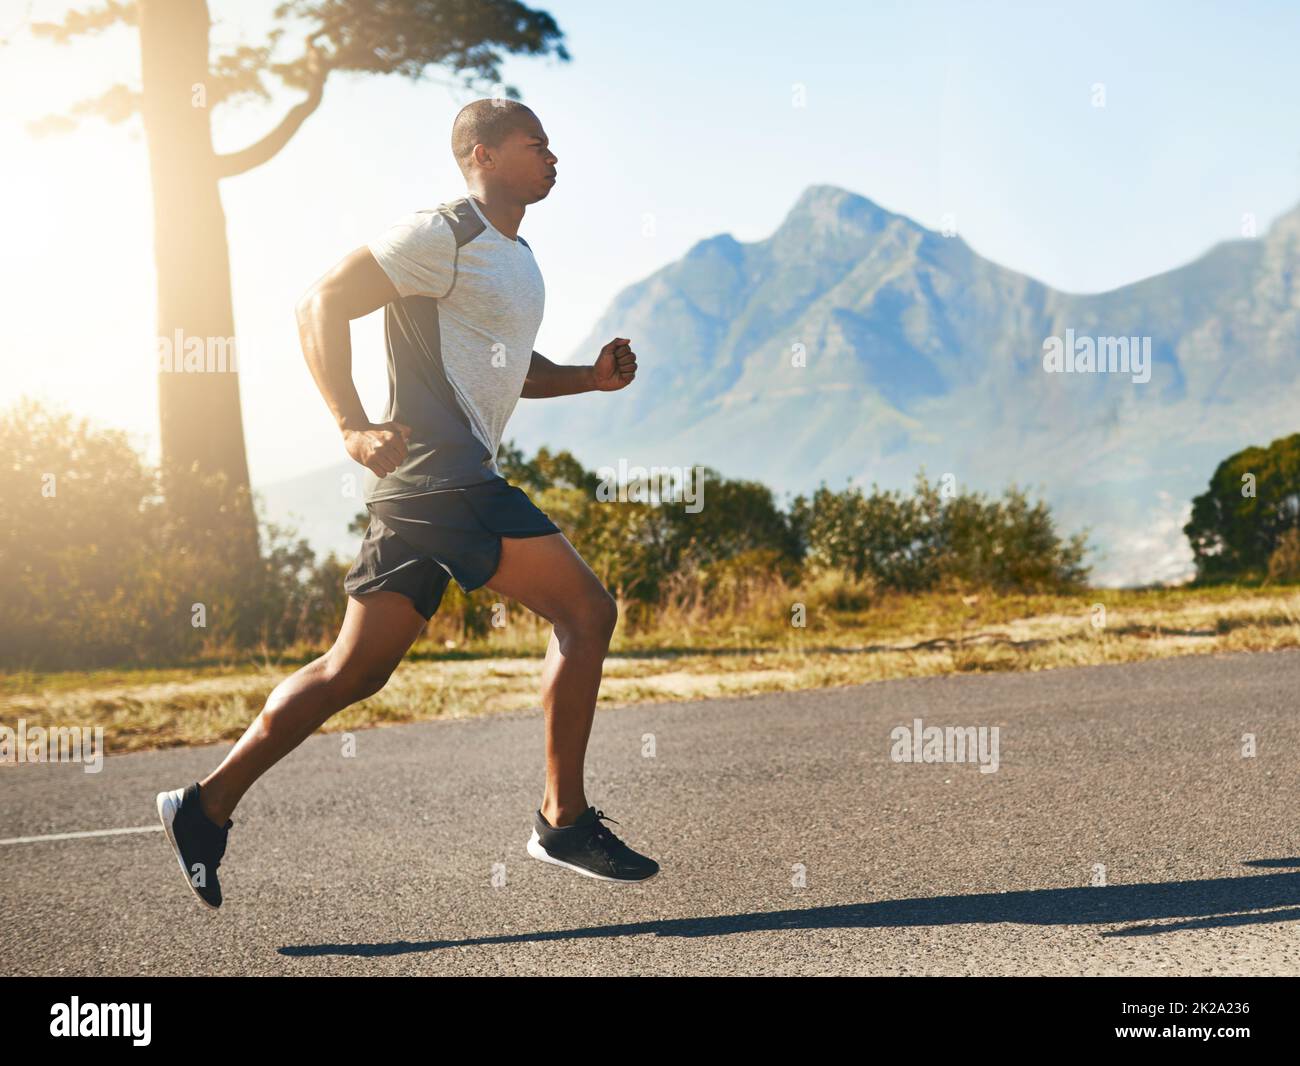 Wind chaser. Shot of a fit young man going for a run outdoors. Stock Photo